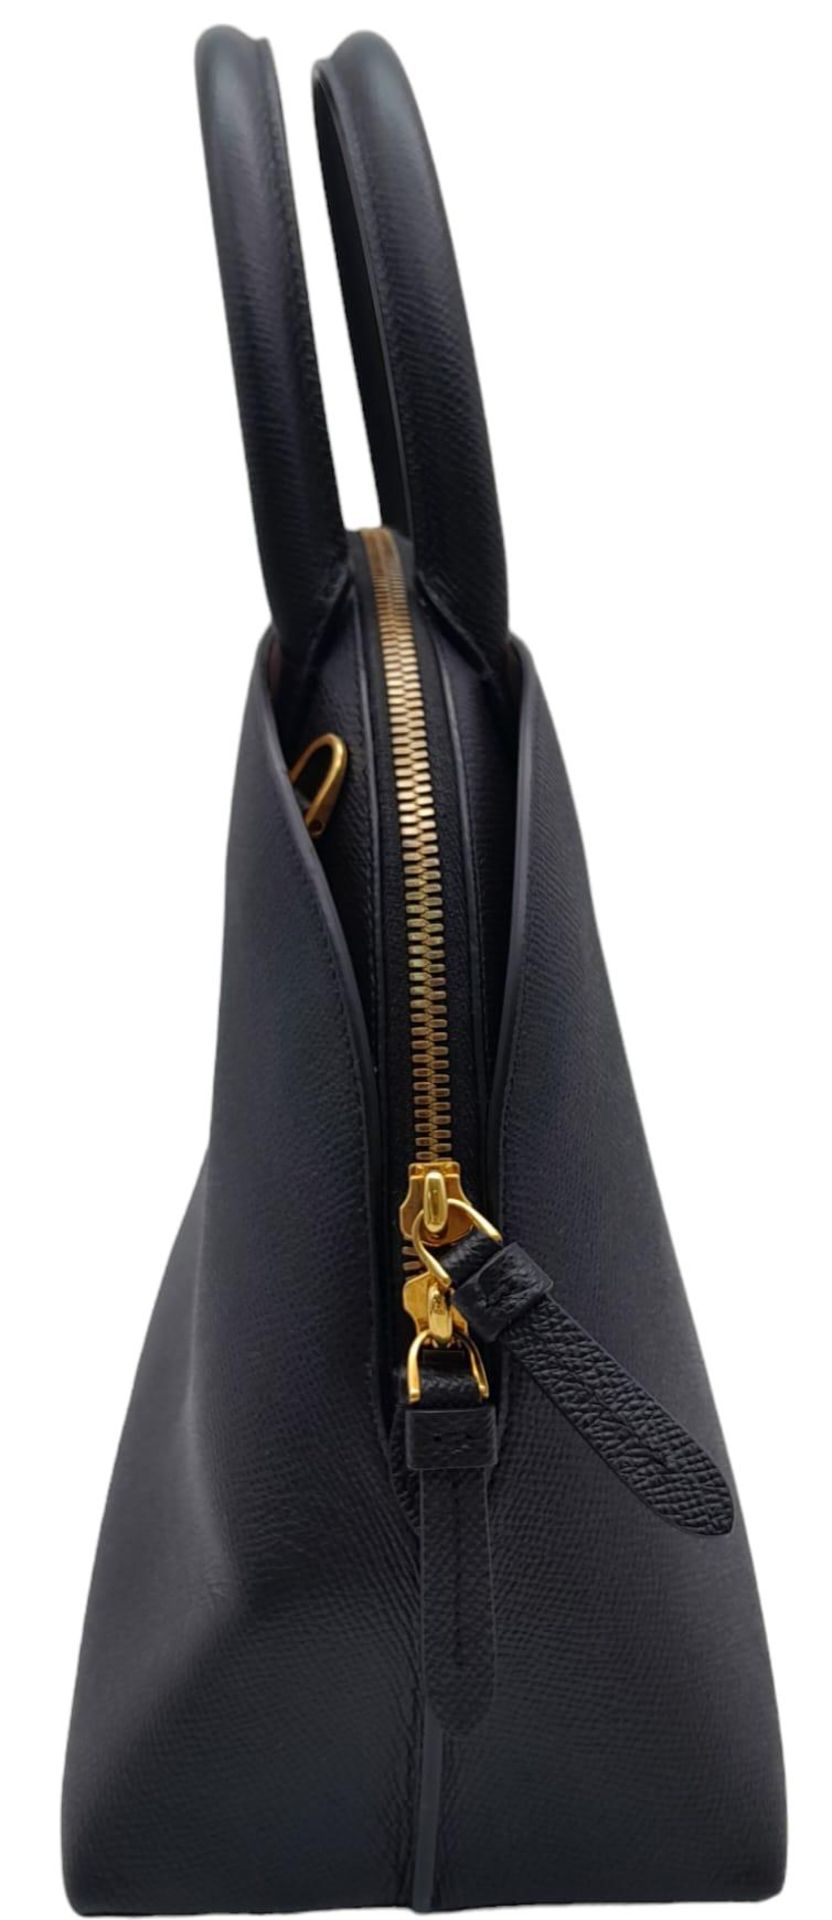 Salvatore Ferragamo Top Hand Bag. Calf leather with rolled top handles, gold tone hardware and two- - Image 3 of 10